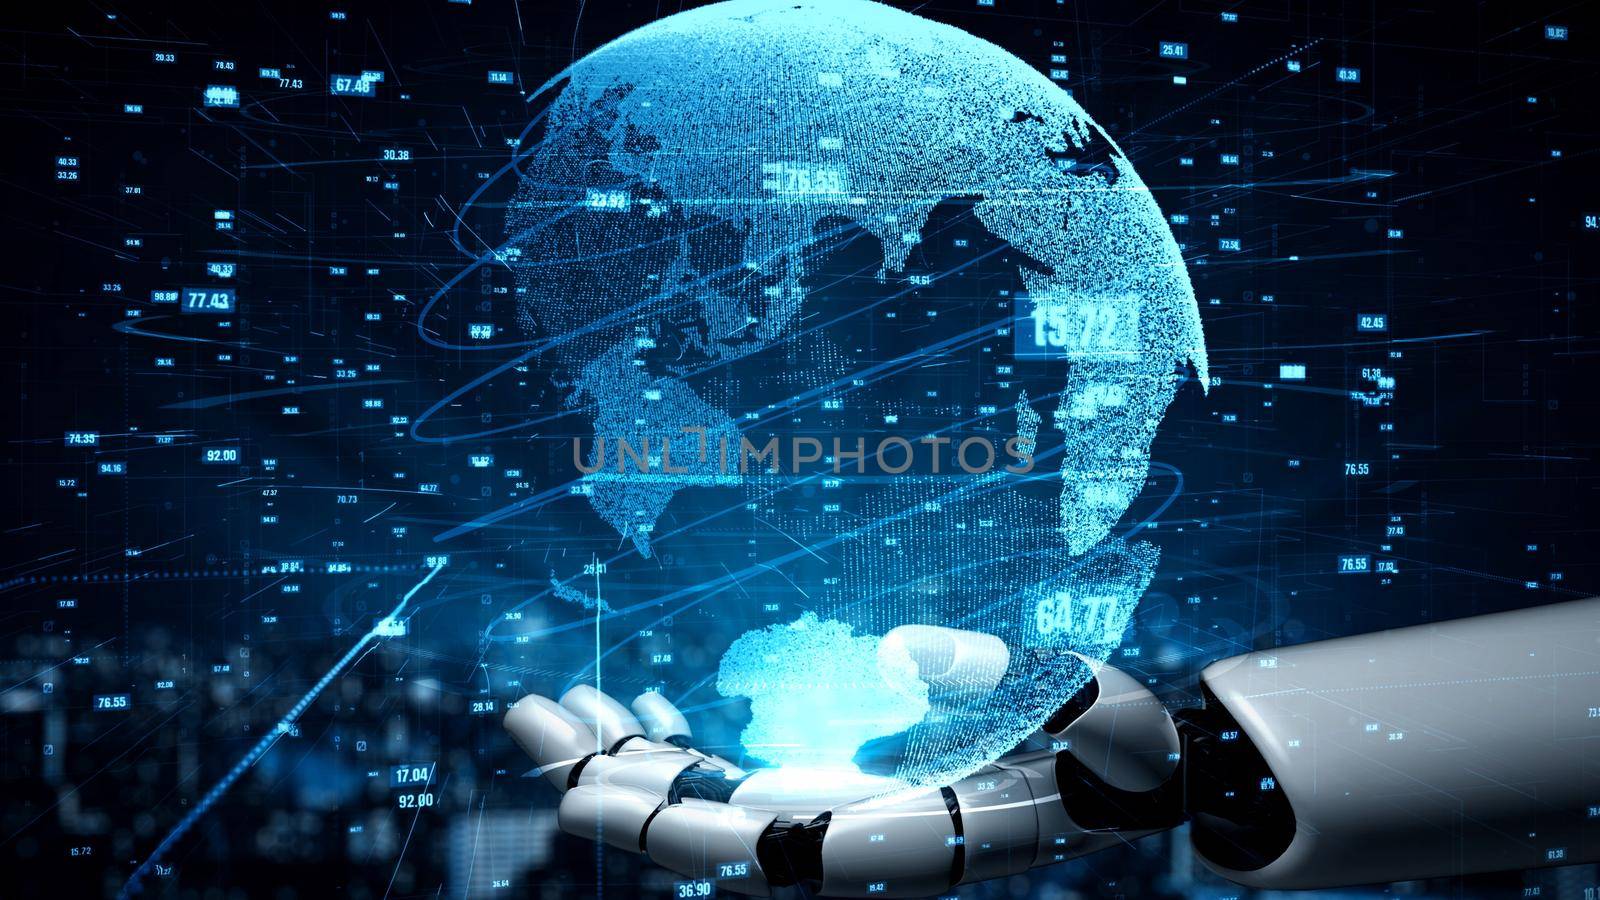 Futuristic robot artificial intelligence enlightening AI technology concept by biancoblue